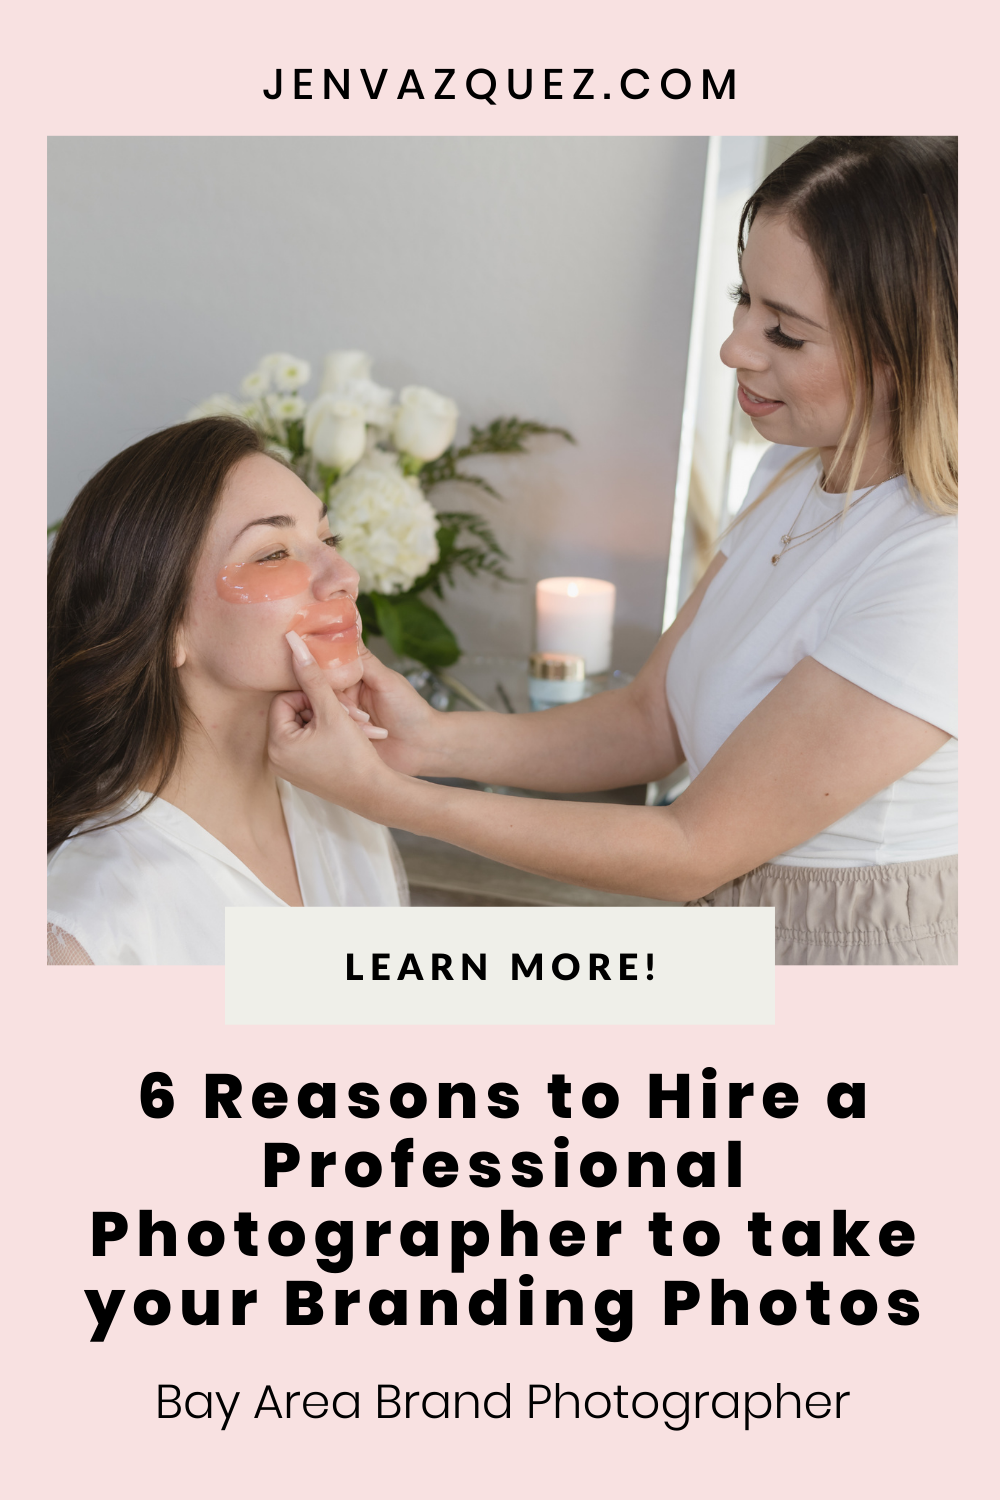 6 Reasons to Hire a Professional Photographer to take your Branding Photos by bay area brand photographer jen vazquez